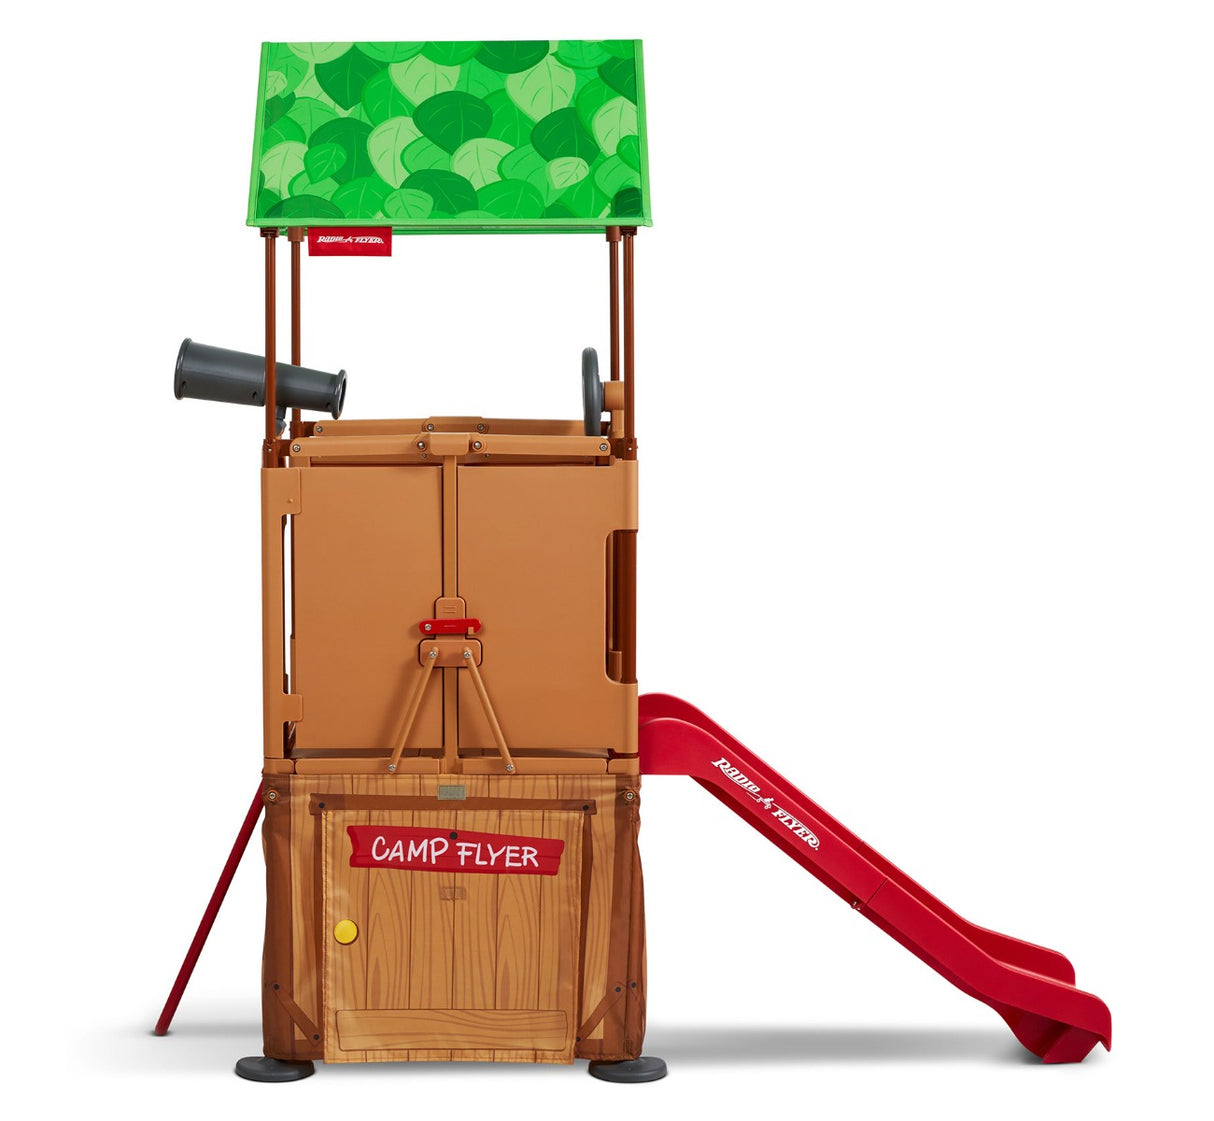 Play & Fold Away Treetop Tower fully assembled